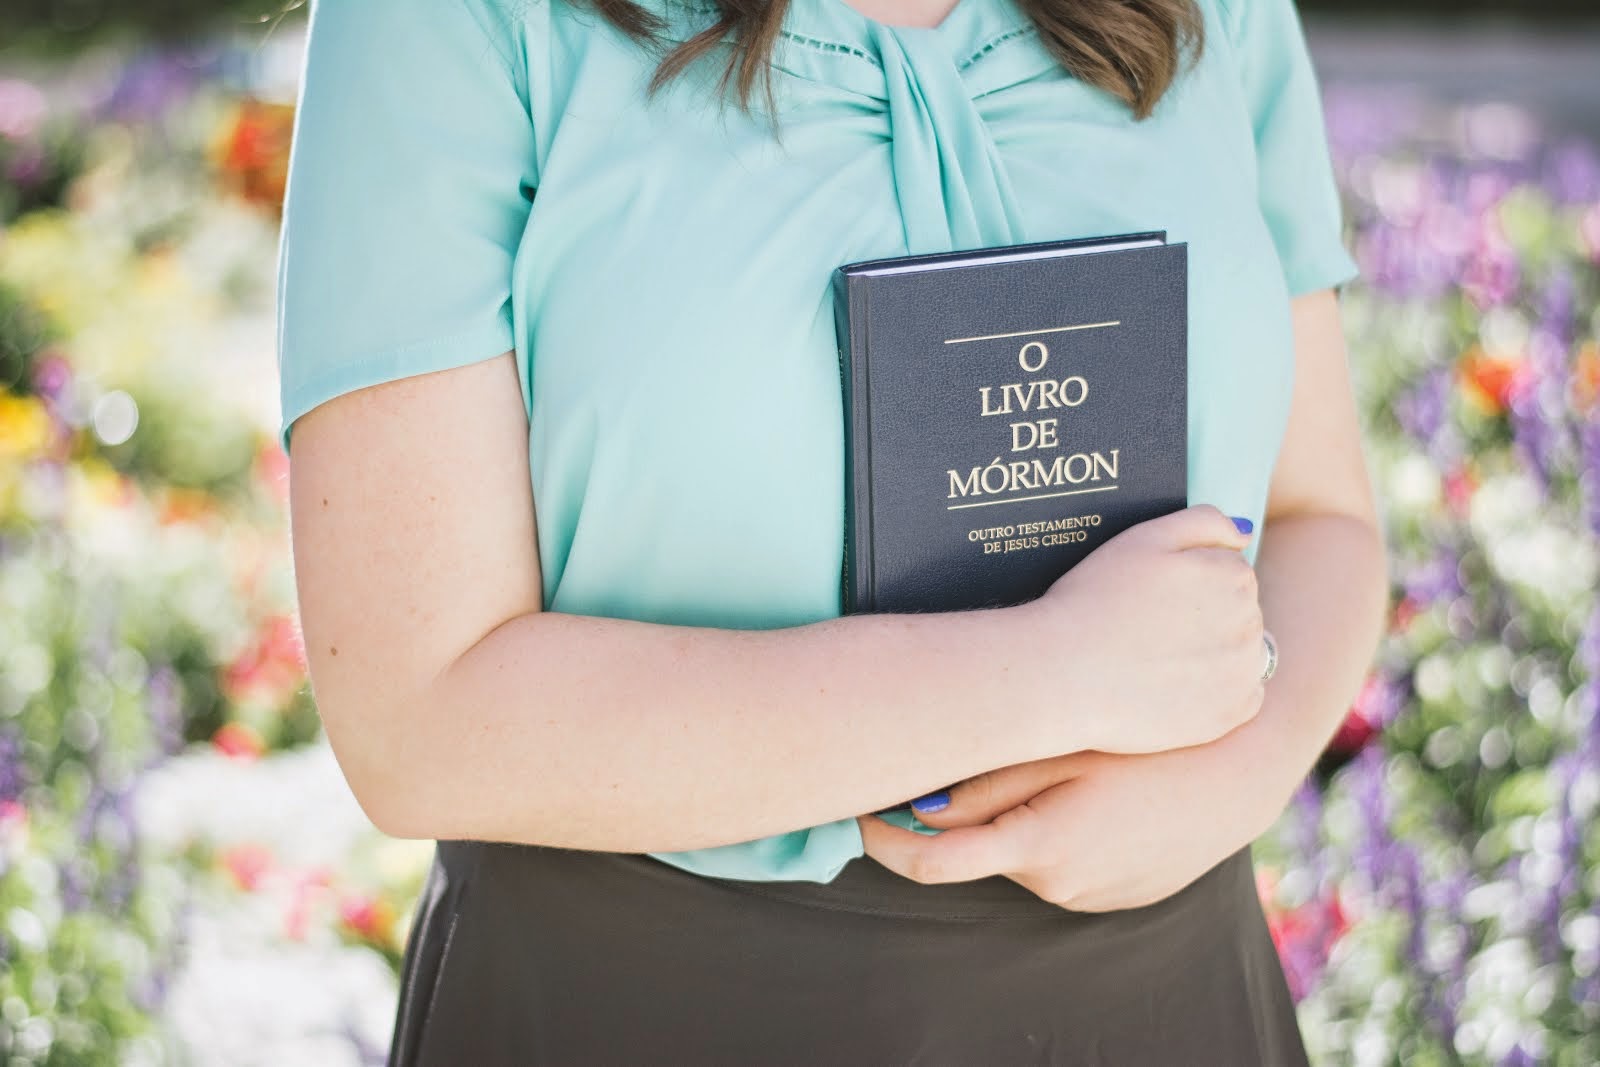 Request a free copy of the Book of Mormon